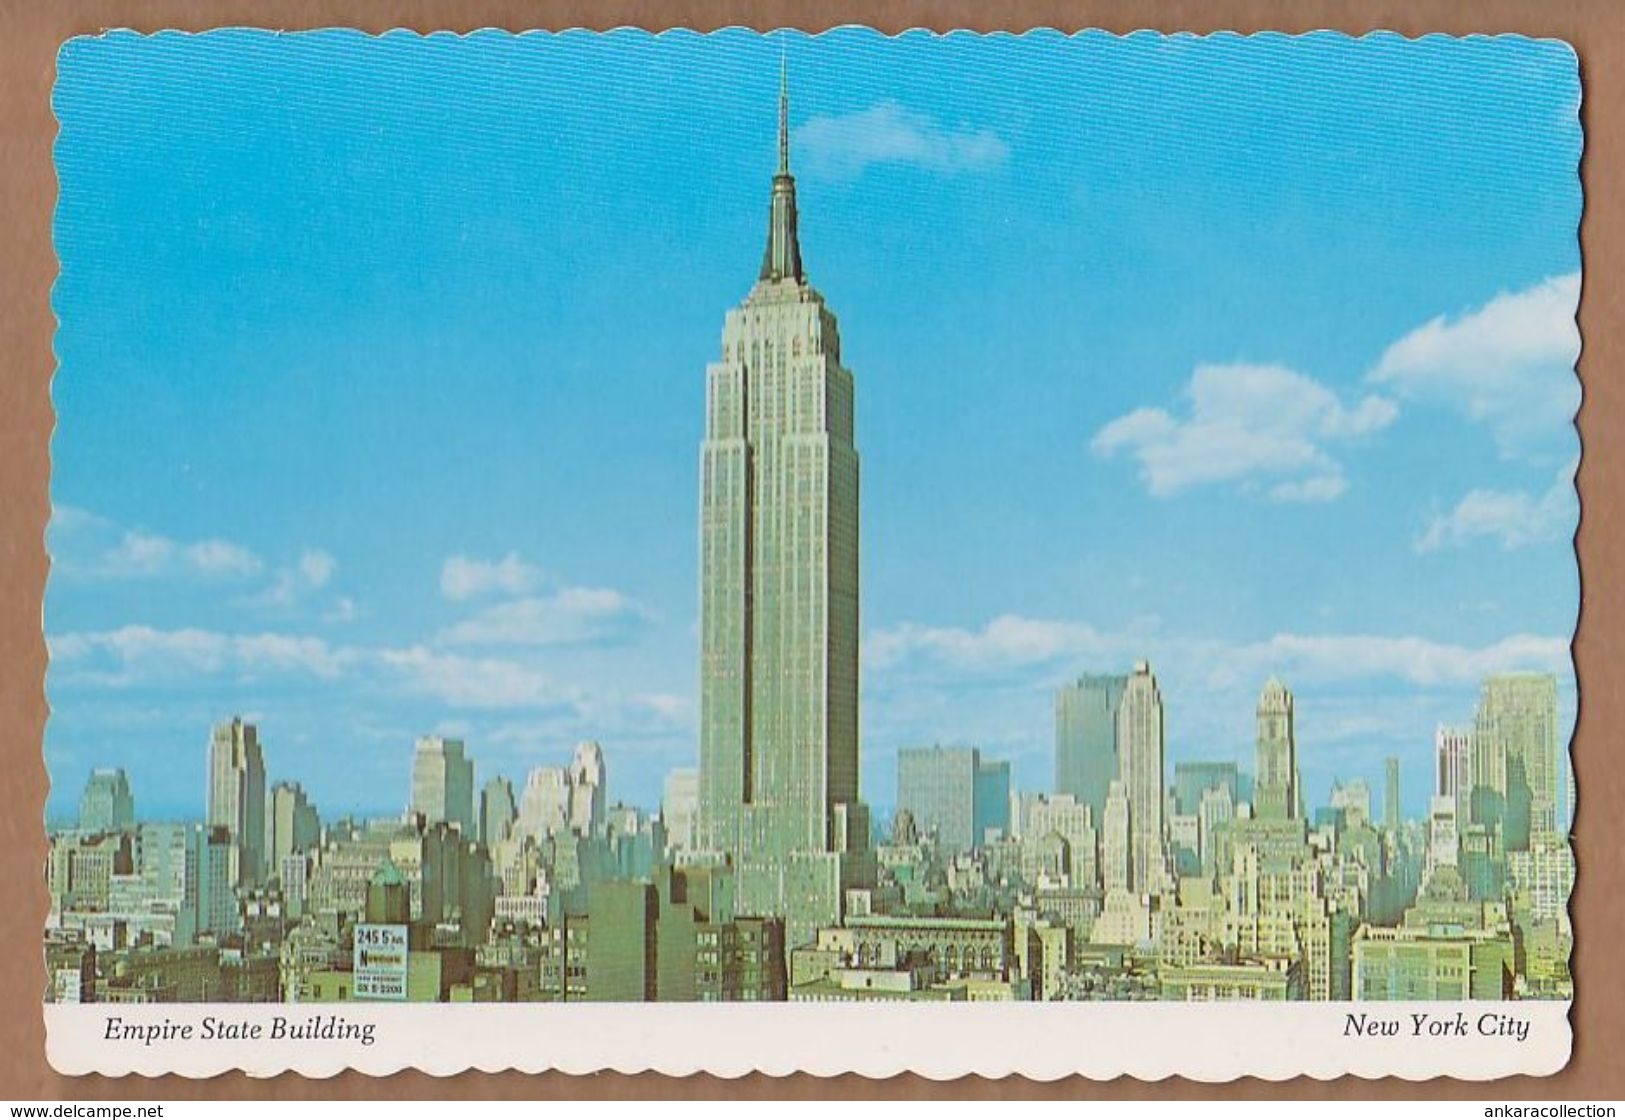 AC - EMPIRE STATE BUILDING NEW YORK CITY UNITED STATES OF AMERICA CARTE POSTALE  POST CARD - Panoramic Views